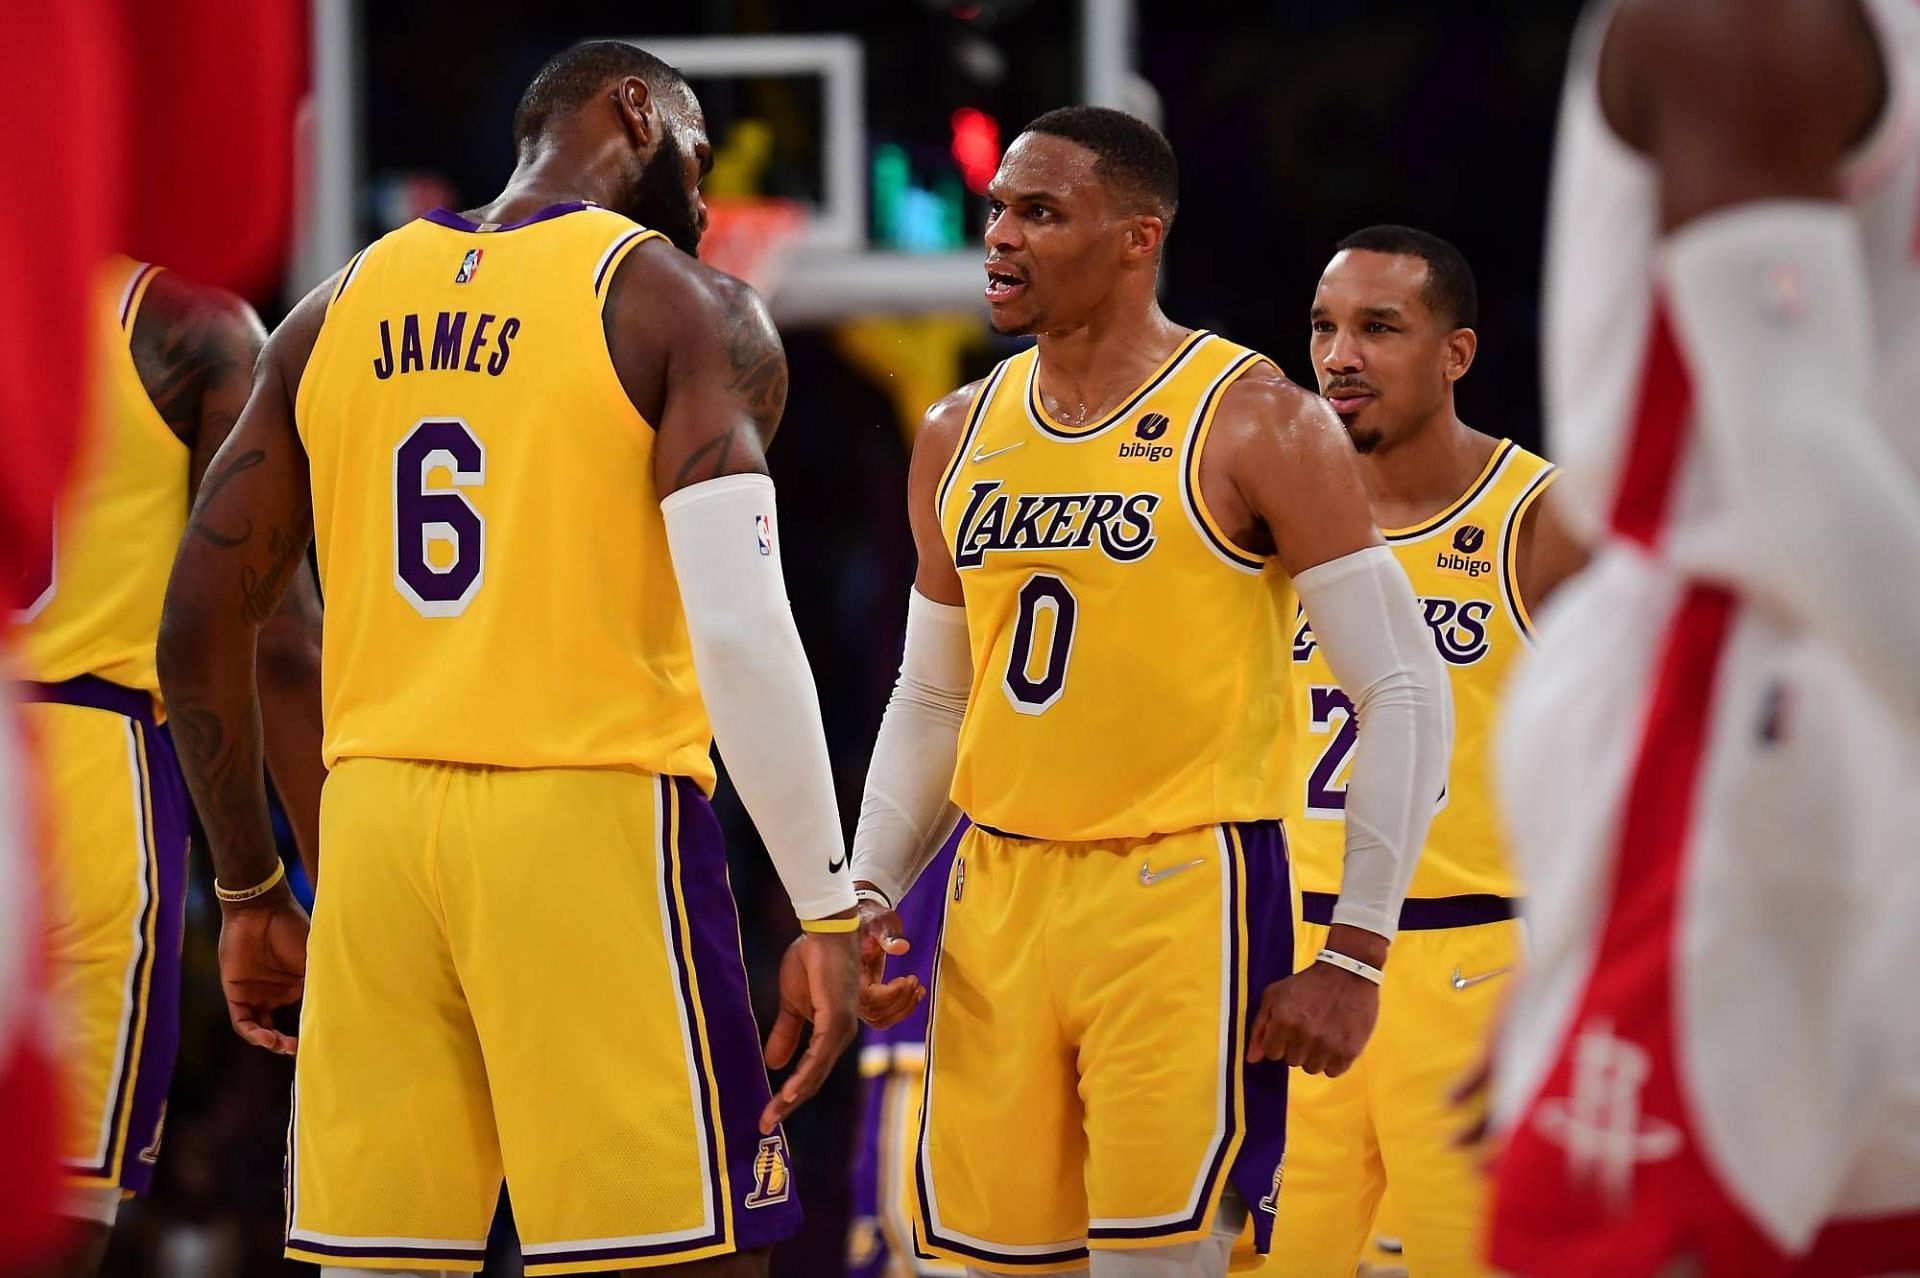 LeBron James and the LA Lakers have to be better on defense to get into the play-in tournament. [Photo: The Japan Times]